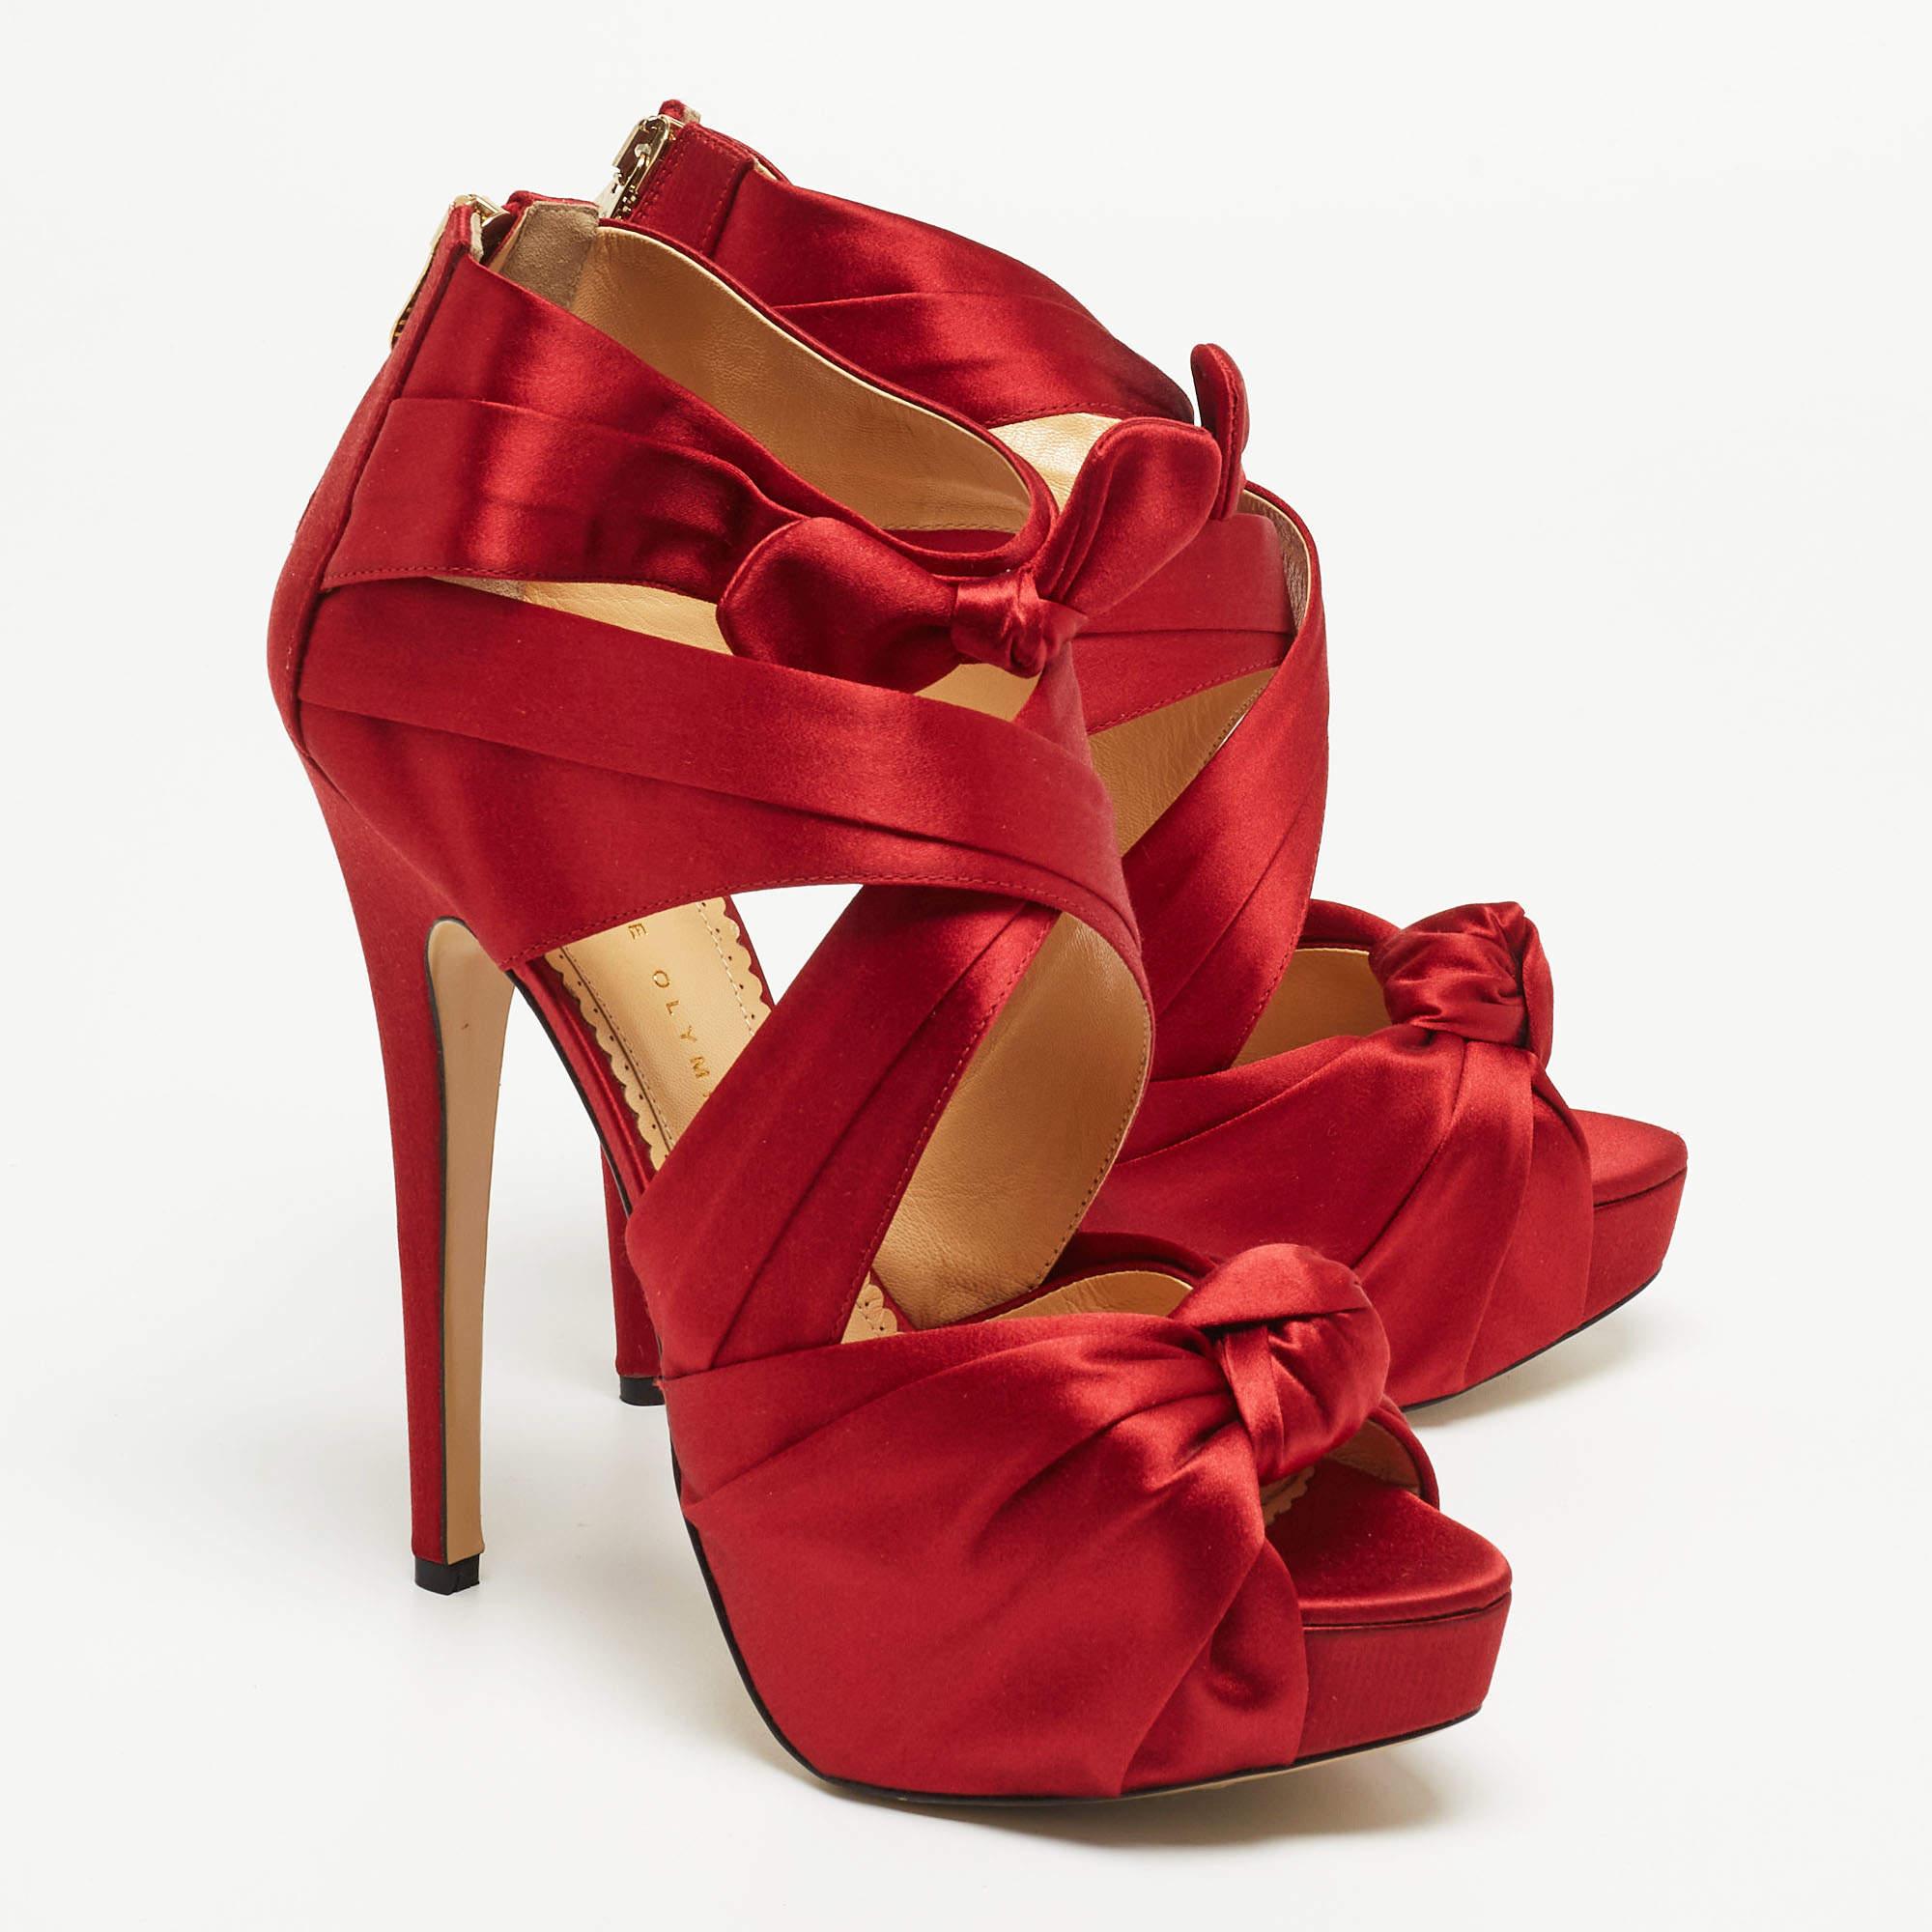 Charlotte Olympia Red Satin Andrea Knotted Platform Sandals Size 41 In Excellent Condition For Sale In Dubai, Al Qouz 2